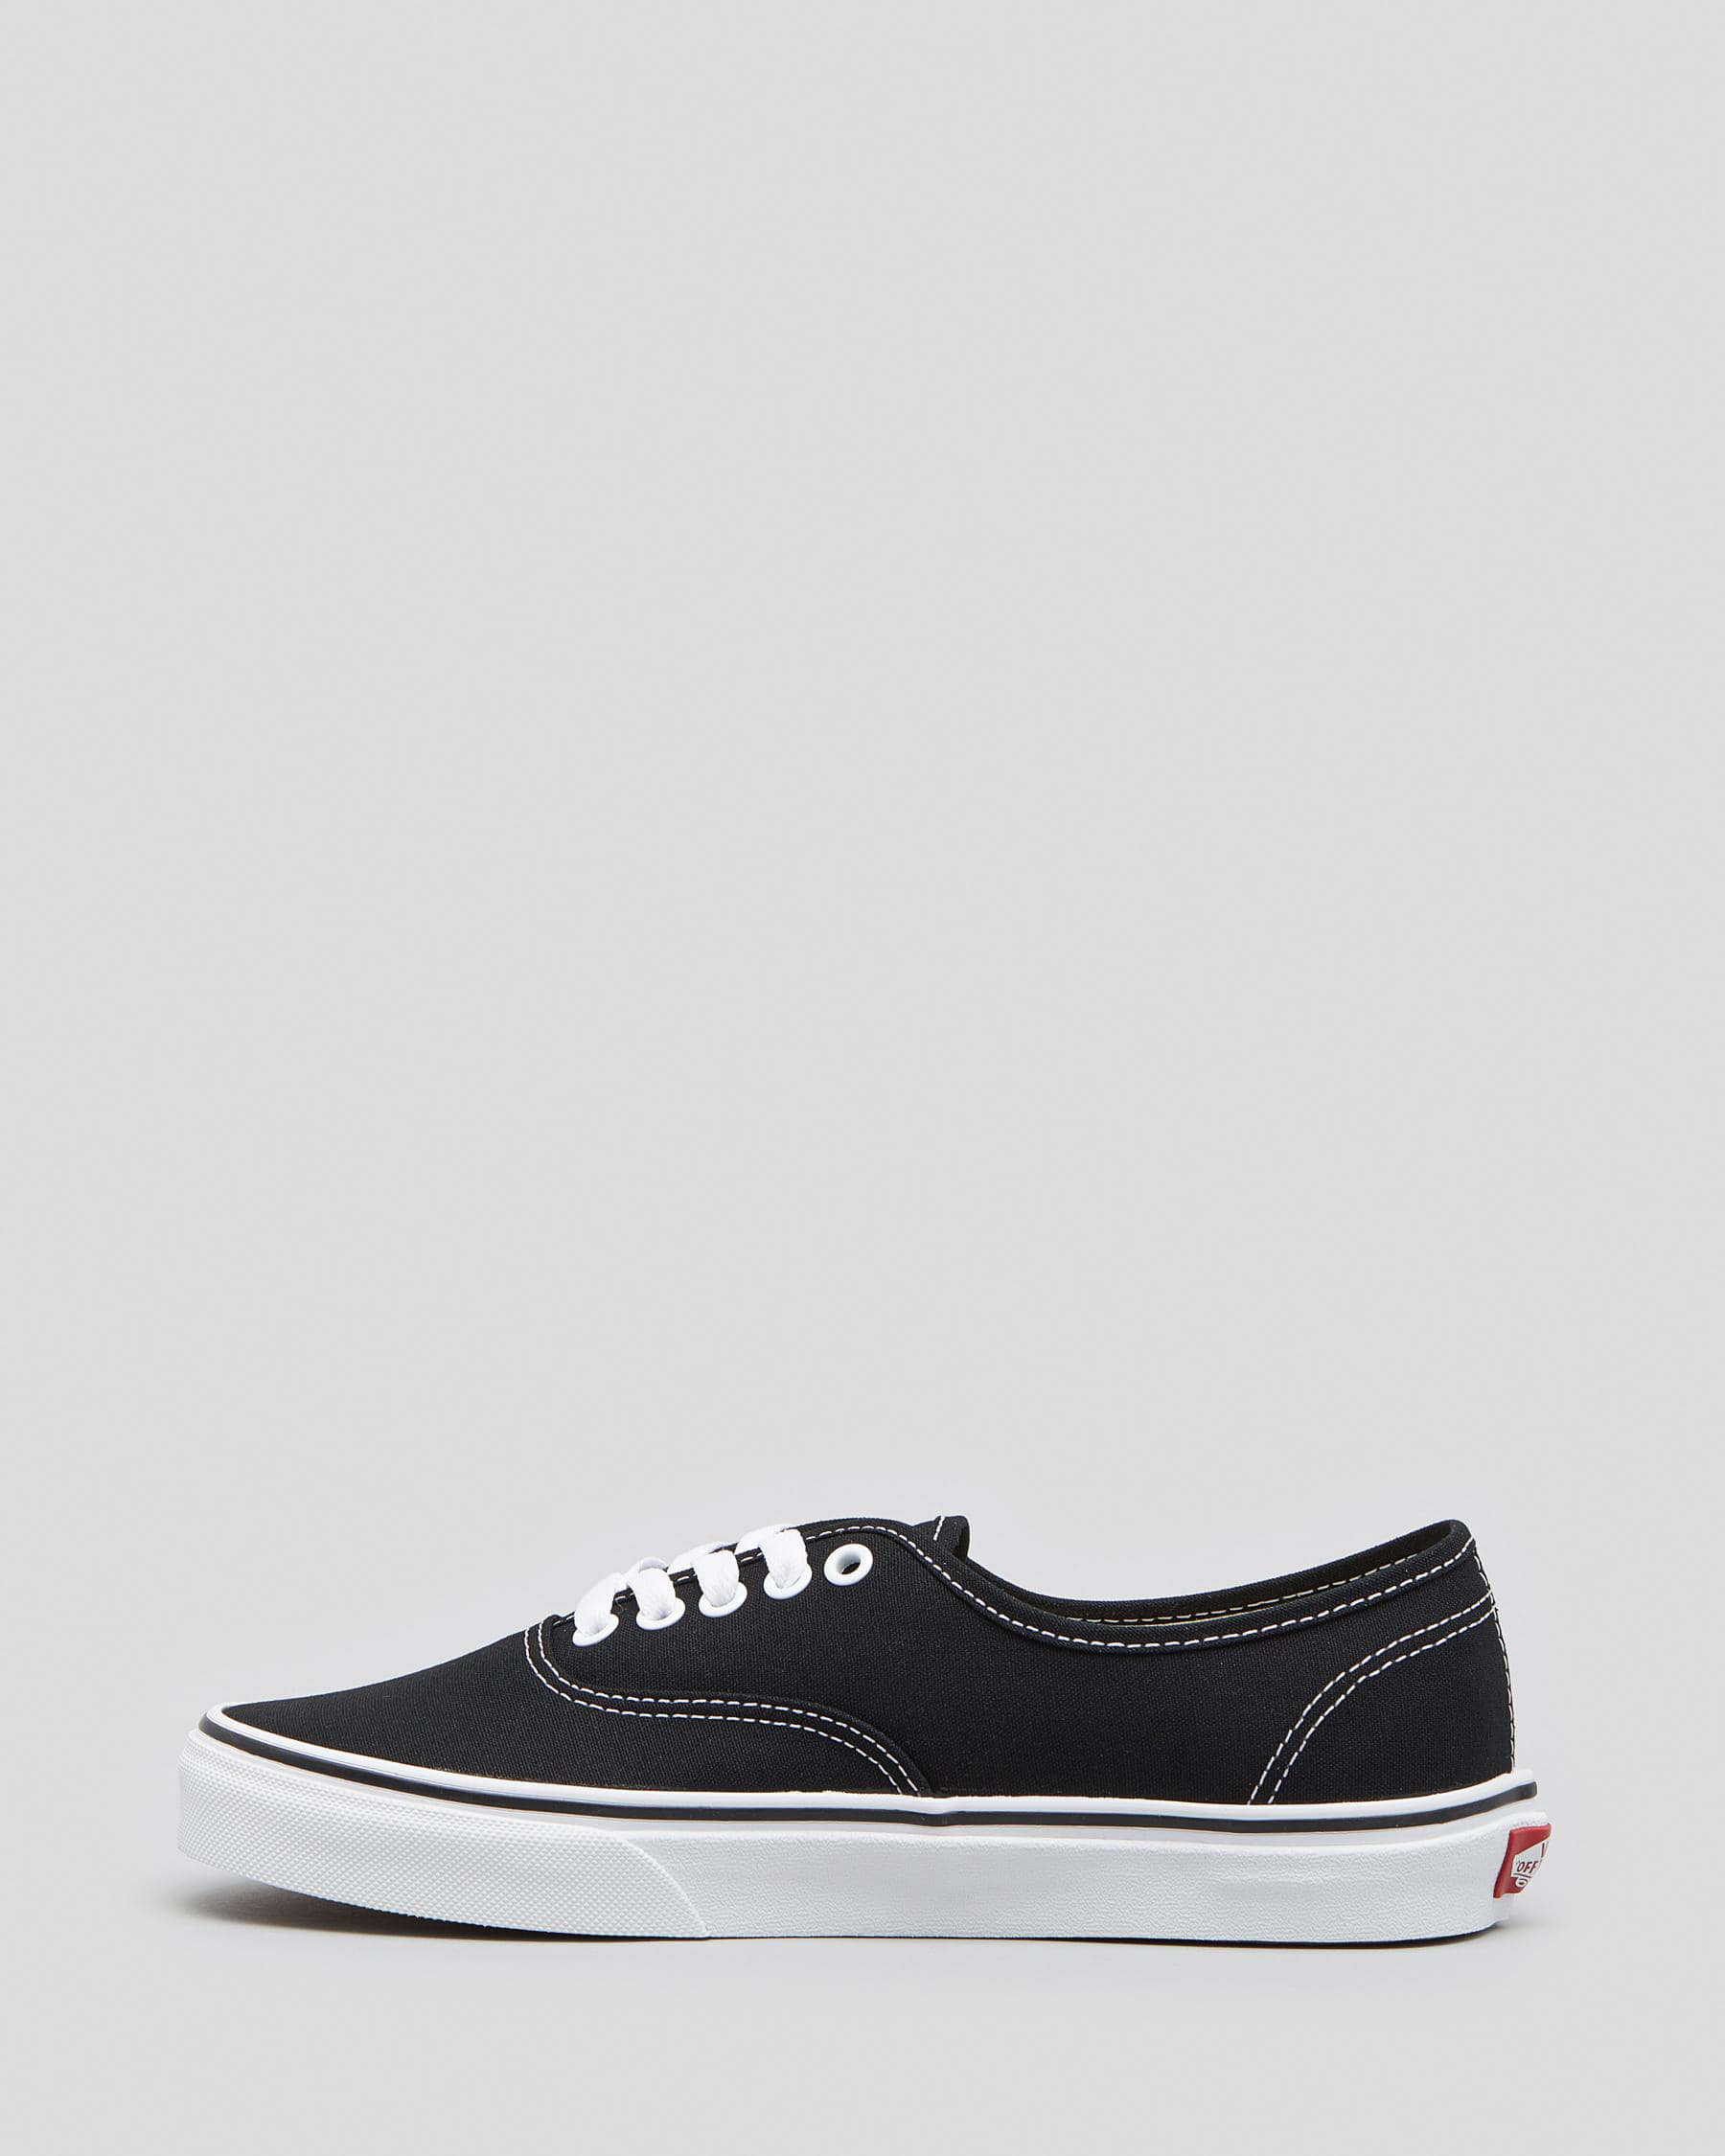 Shop Vans Boys' Authentic Shoes In Black/white - Fast Shipping & Easy ...